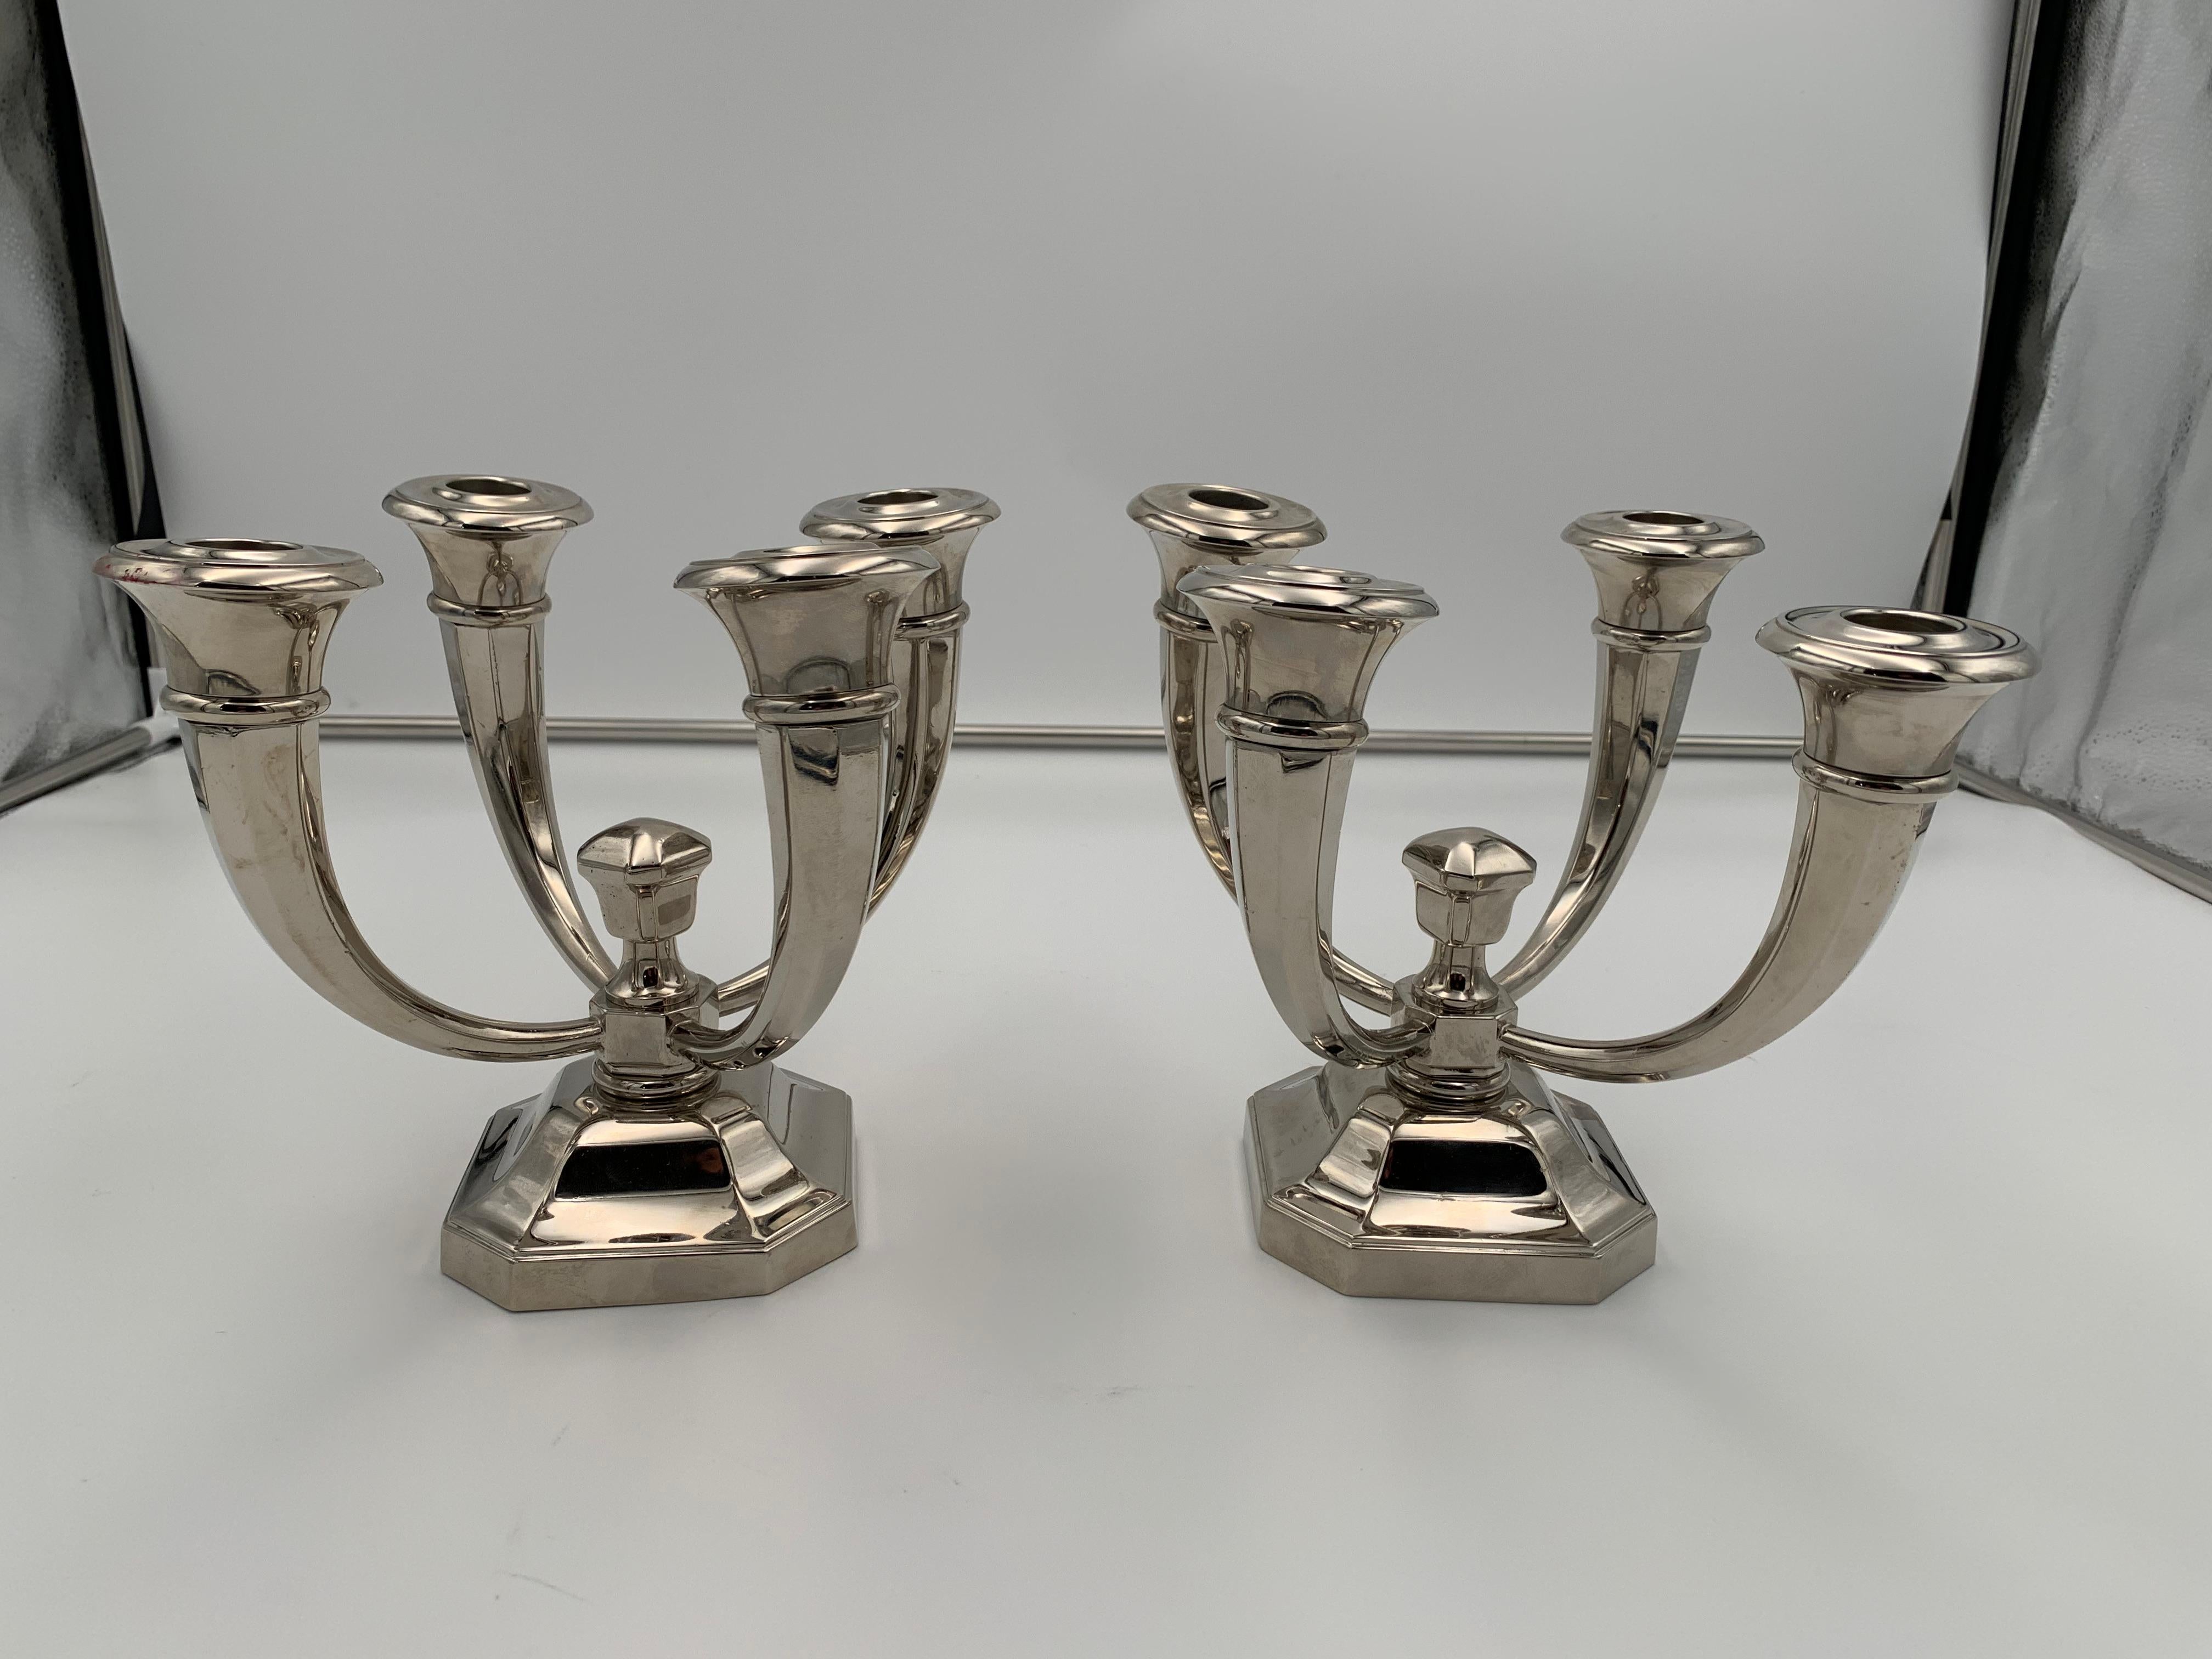 Pair of Art Deco Candlesticks by J. Leleu, Nickel-Plate, Bronze, France, c. 1930 In Excellent Condition For Sale In Regensburg, DE